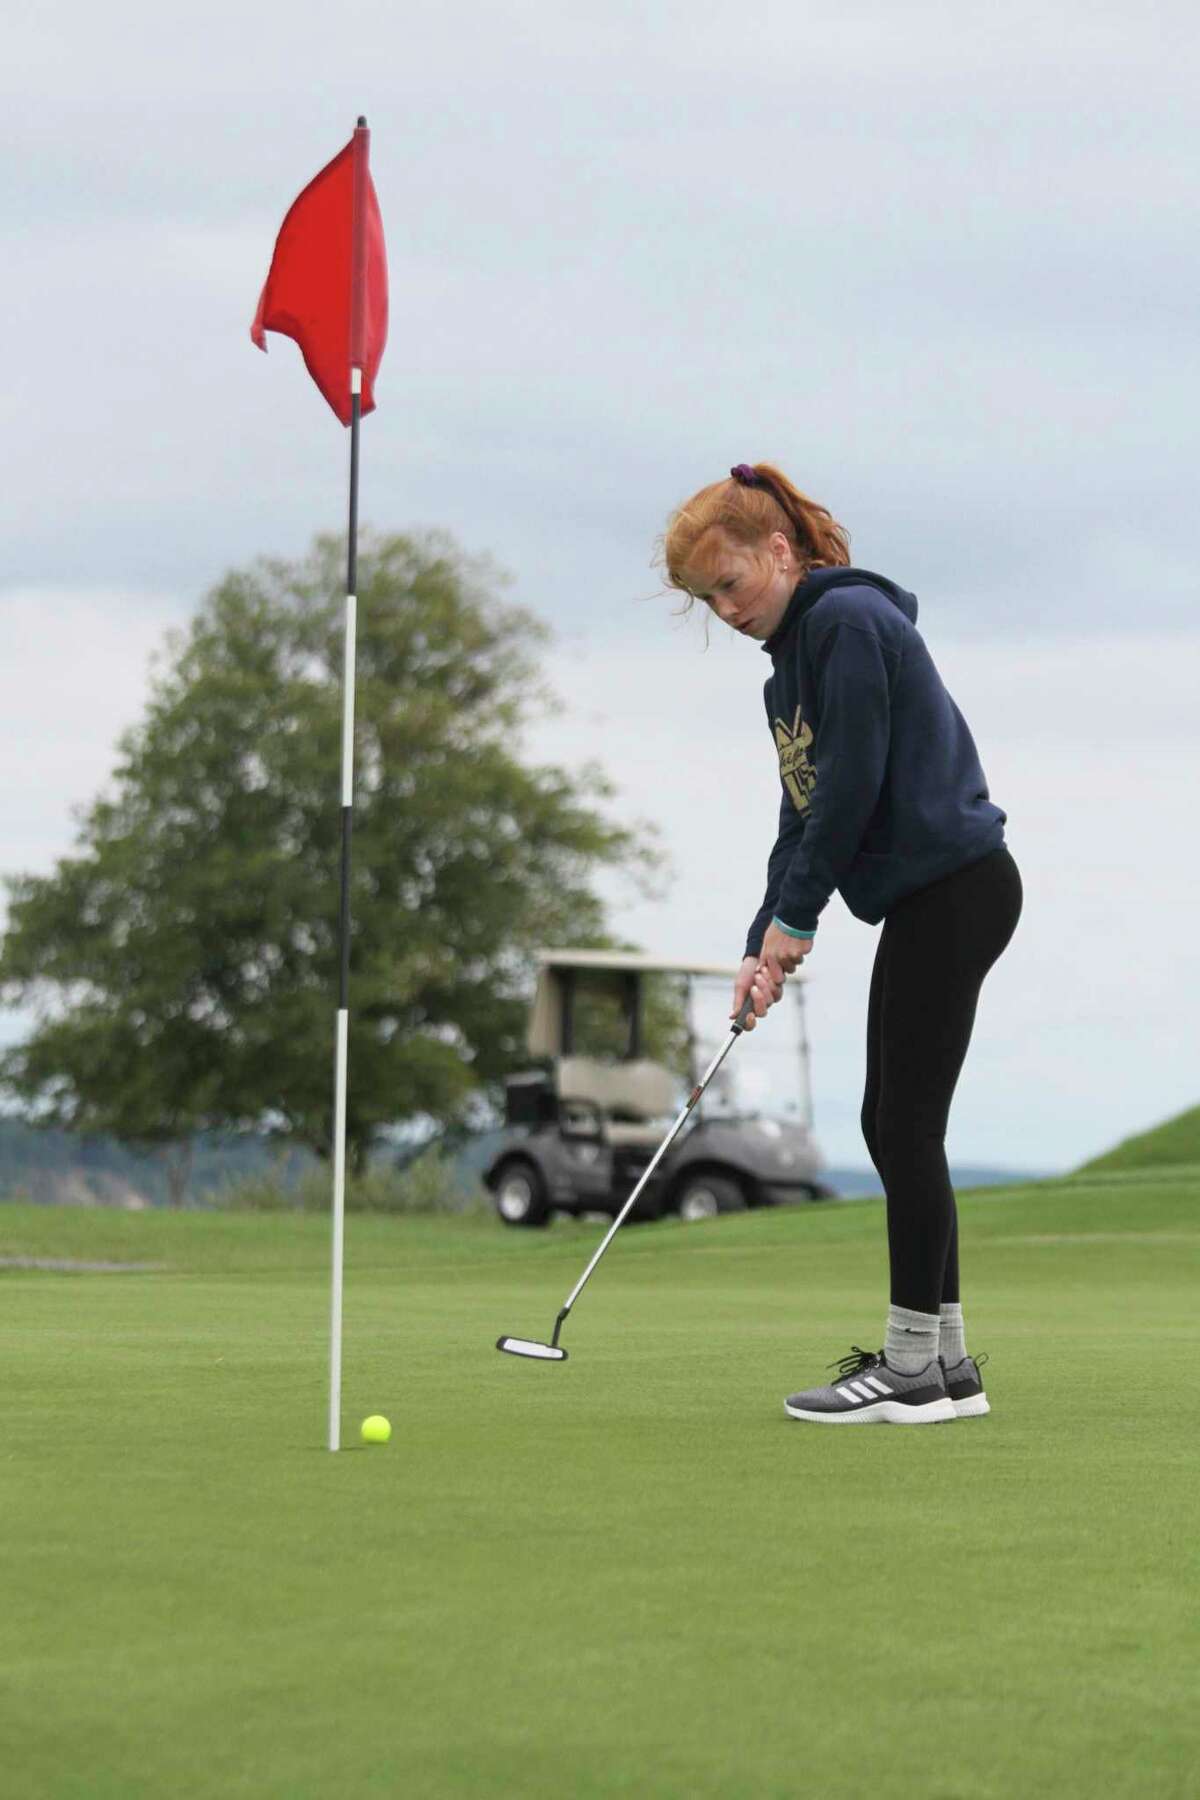 Manistee's Kendal Waligorski sinks a putt this past season. The Chippewas were recently named academic all-state. (News Advocate file photo)